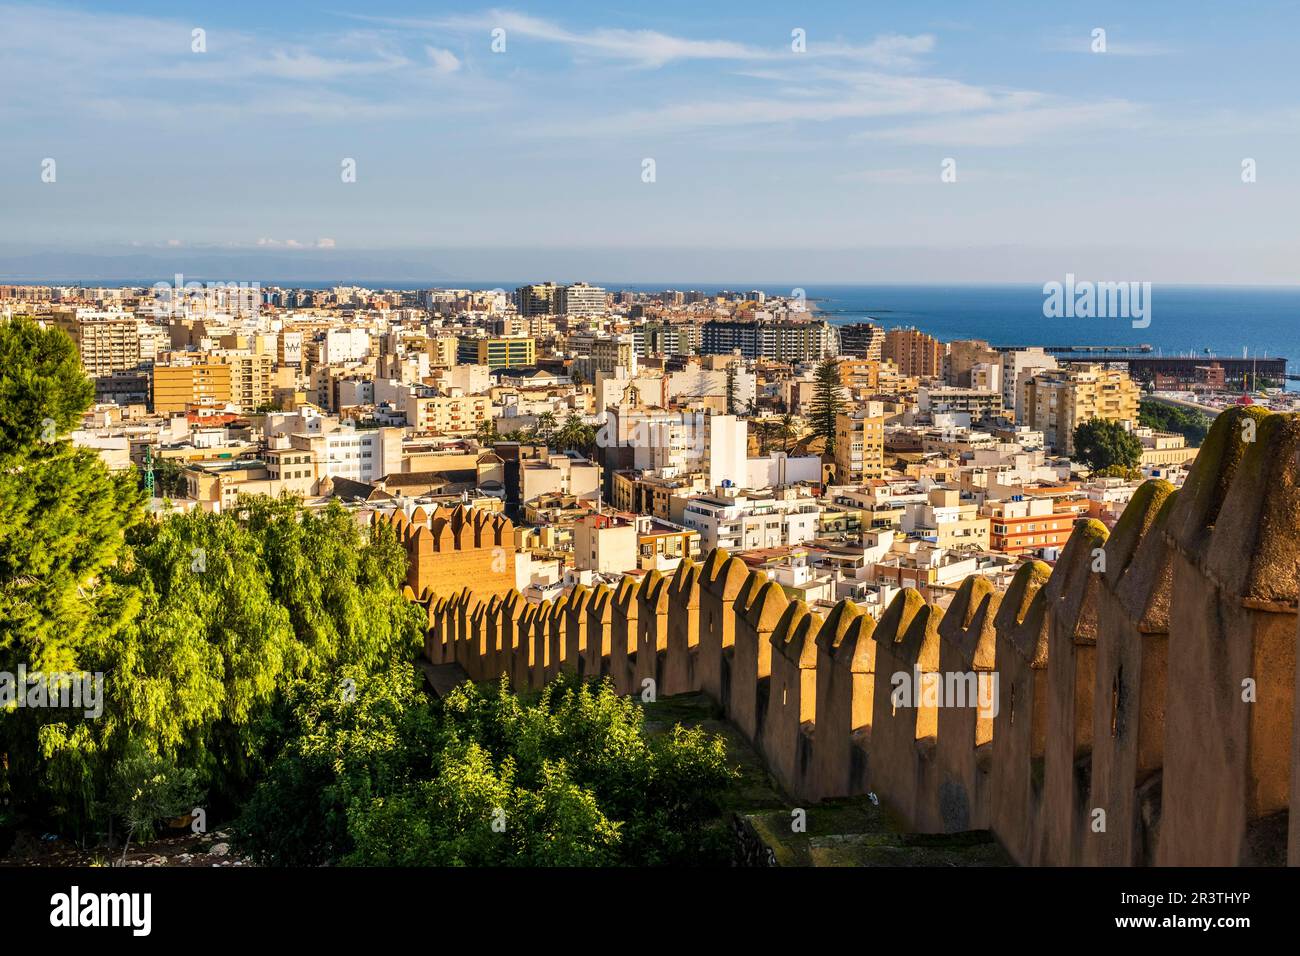 Great viw of the Alcazaba of Almeria, a fortified complex in southern Spain, constrution of defensive citadel with walls, towers, squares, houses and Stock Photo